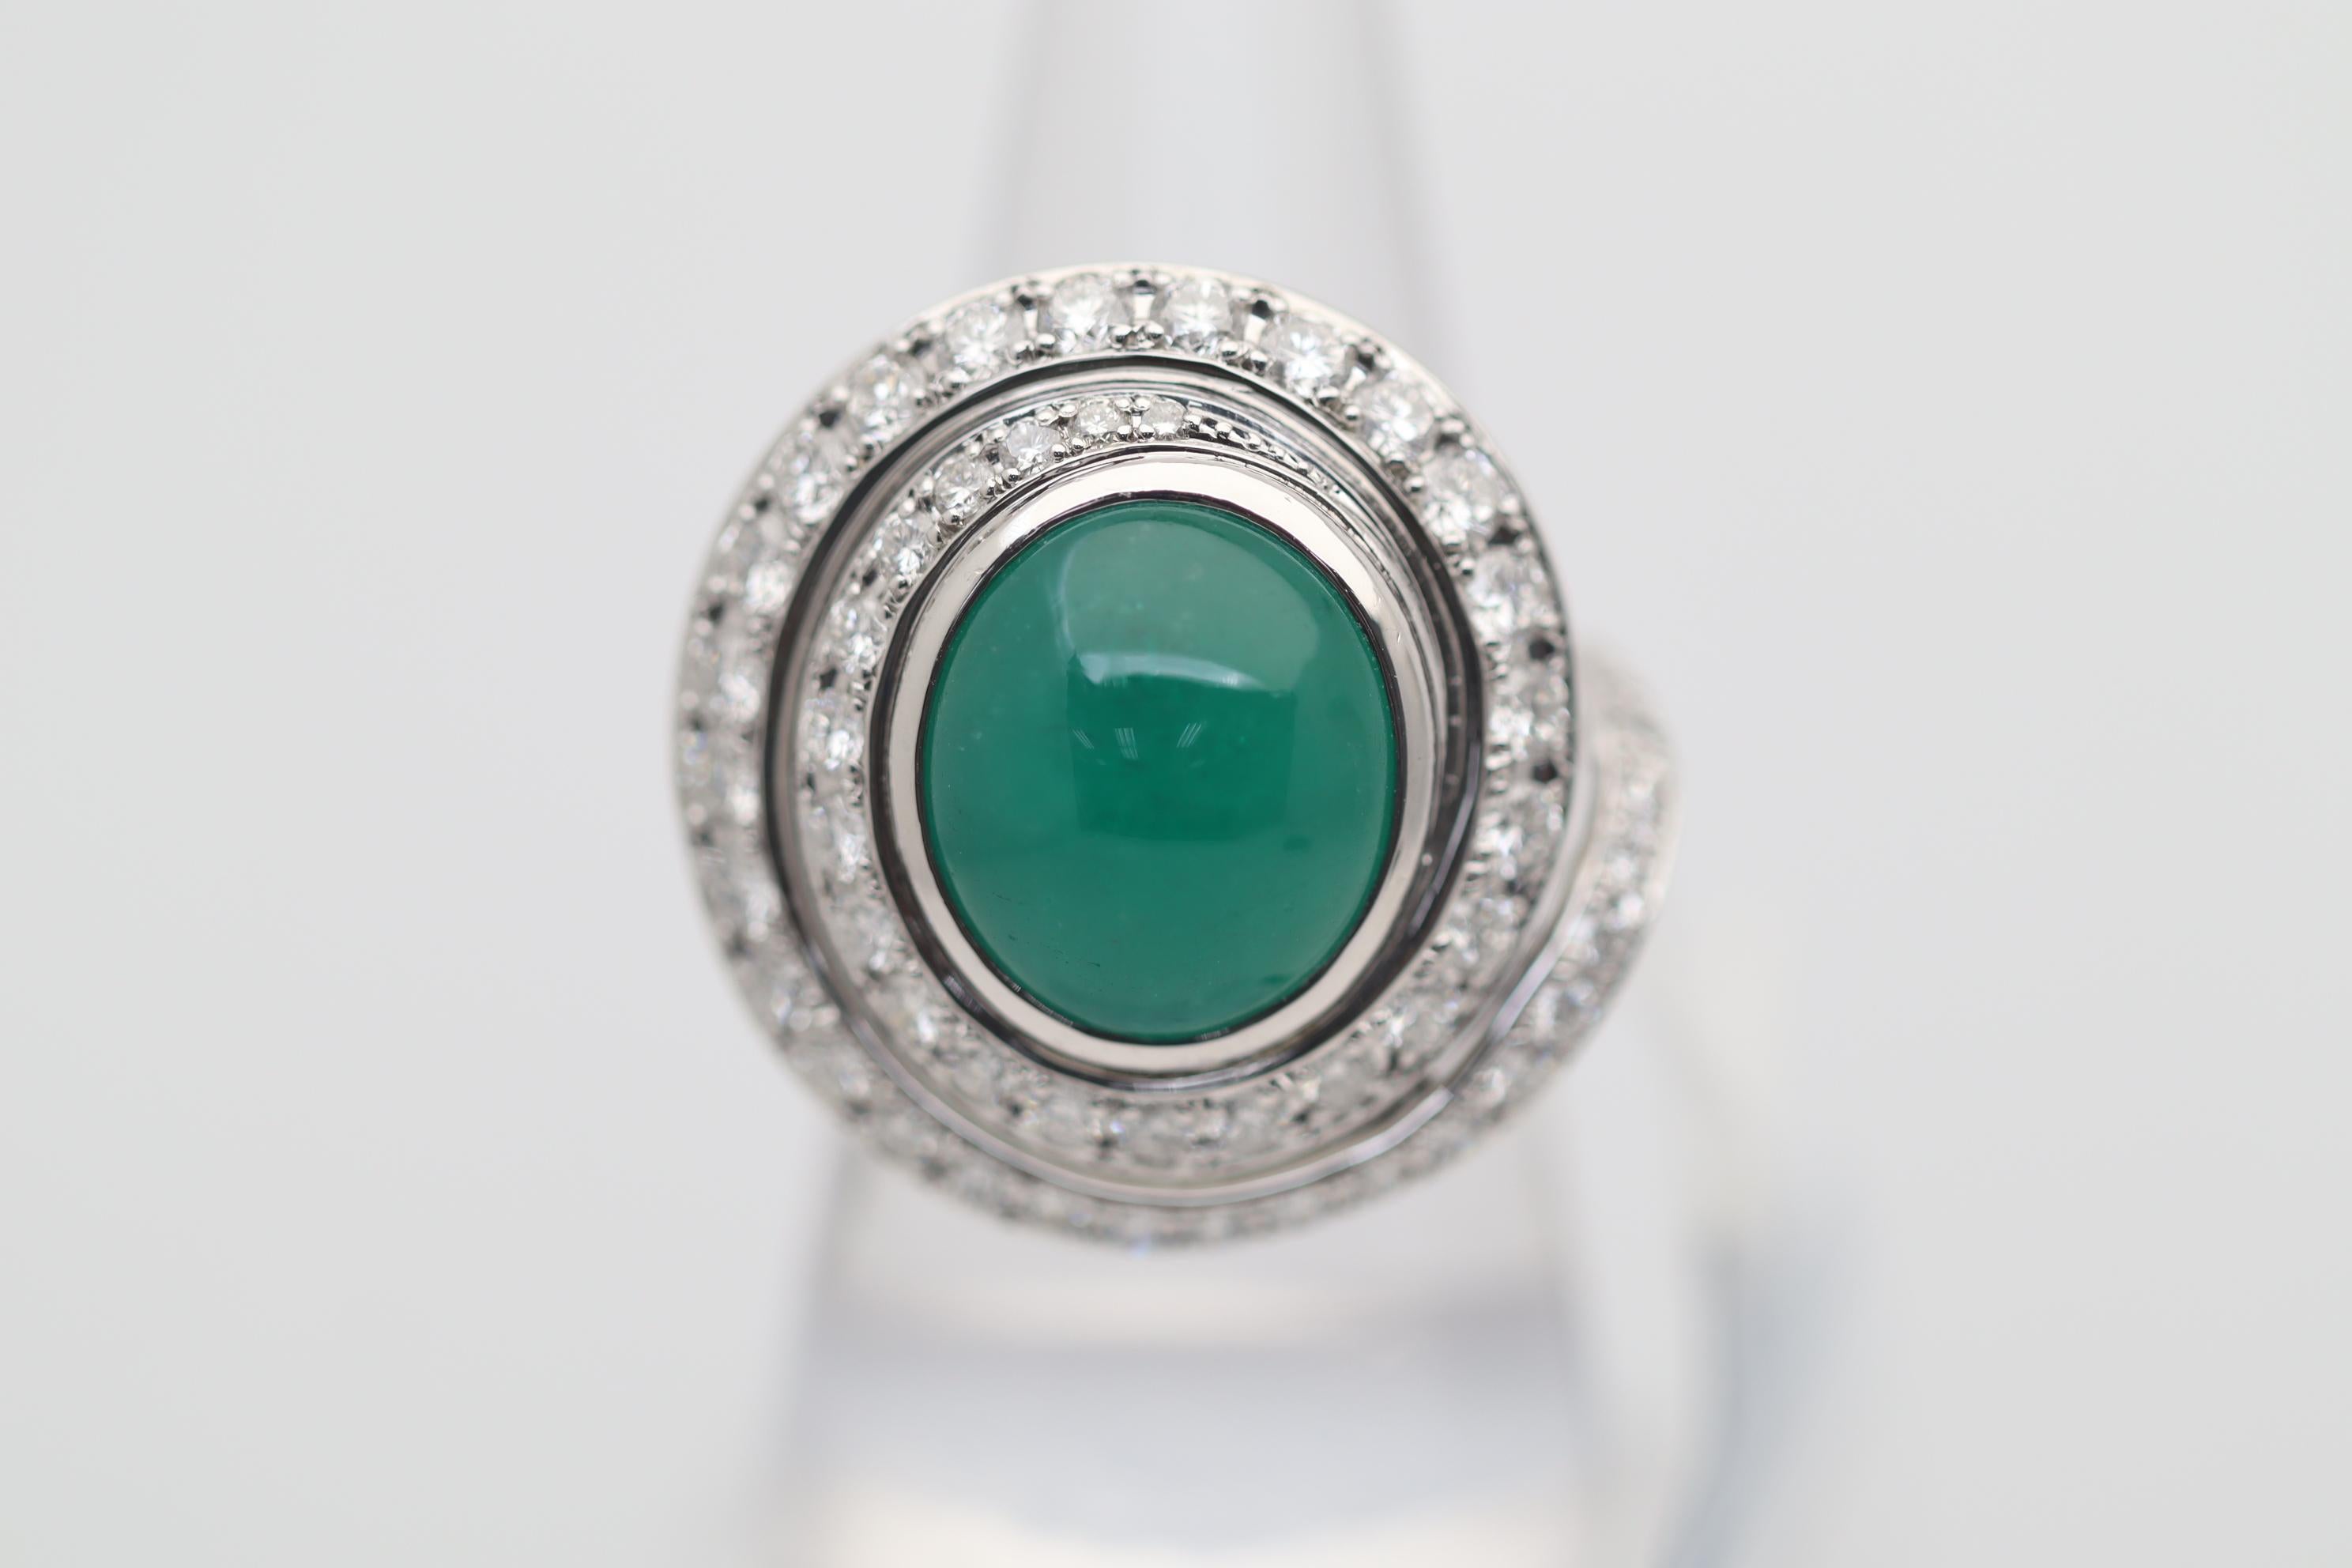 A large and impressive ring featuring a 8.59 carat cabochon emerald with an even deep green color. It is accented by 4.31 carats of round brilliant-cut diamonds set spiraling around the emerald as well as additional diamonds set on the underside of